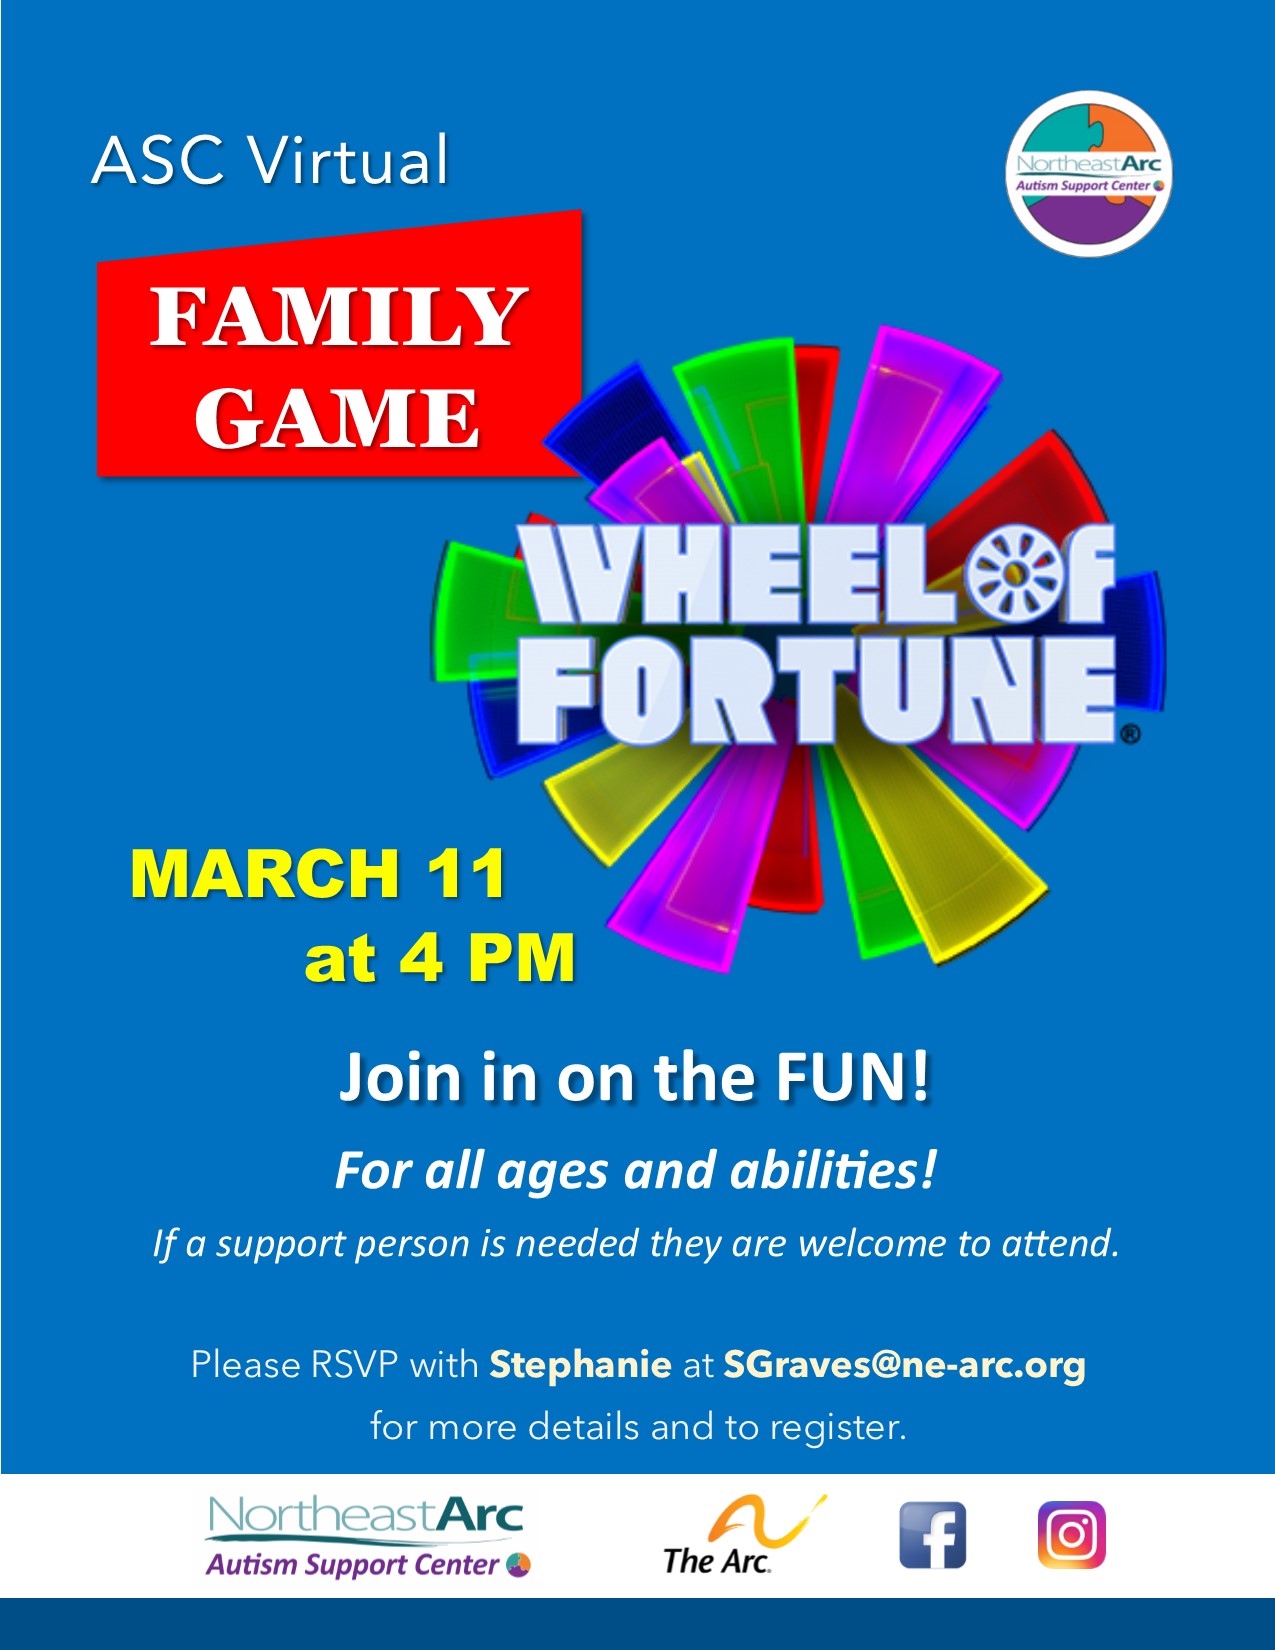 Autism Support Center Virtual Family Game - Wheel of Fortune. March 11 at 4PM. For all ages and abilities. Please RSVP Stephanie at SGraves@ne-arc.org for more details and to register.